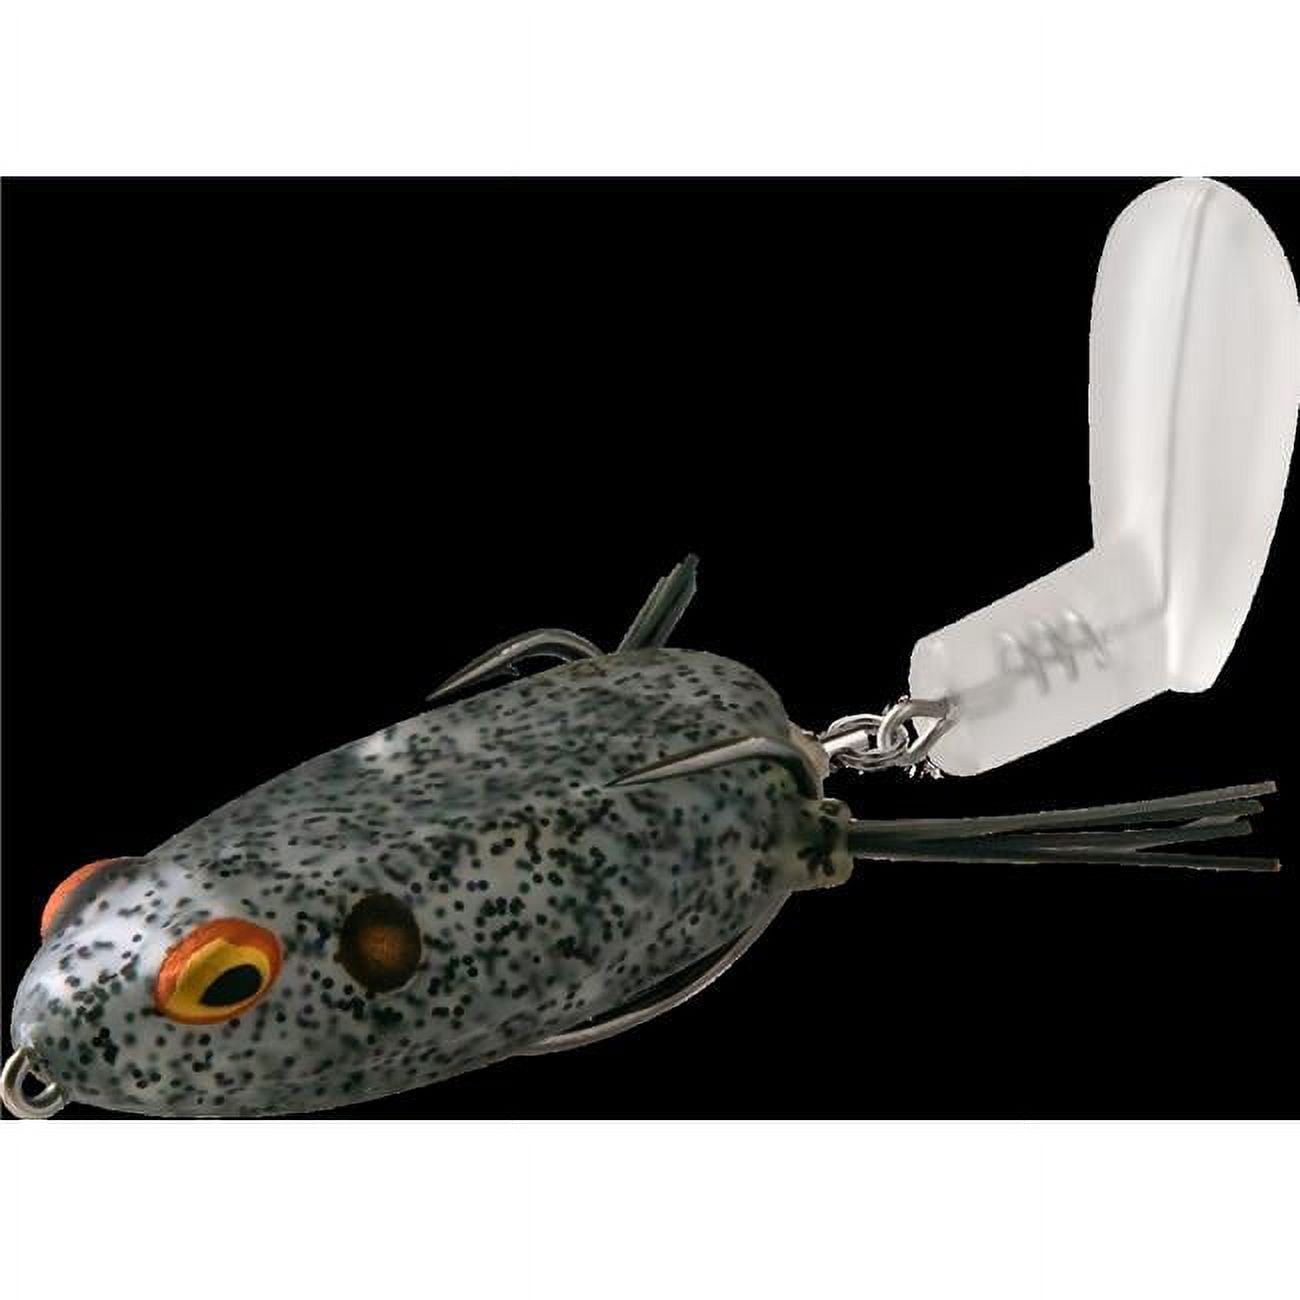 BOOYAH ToadRunner Jr Fishing Lure Hollow body Frog Shad Frog